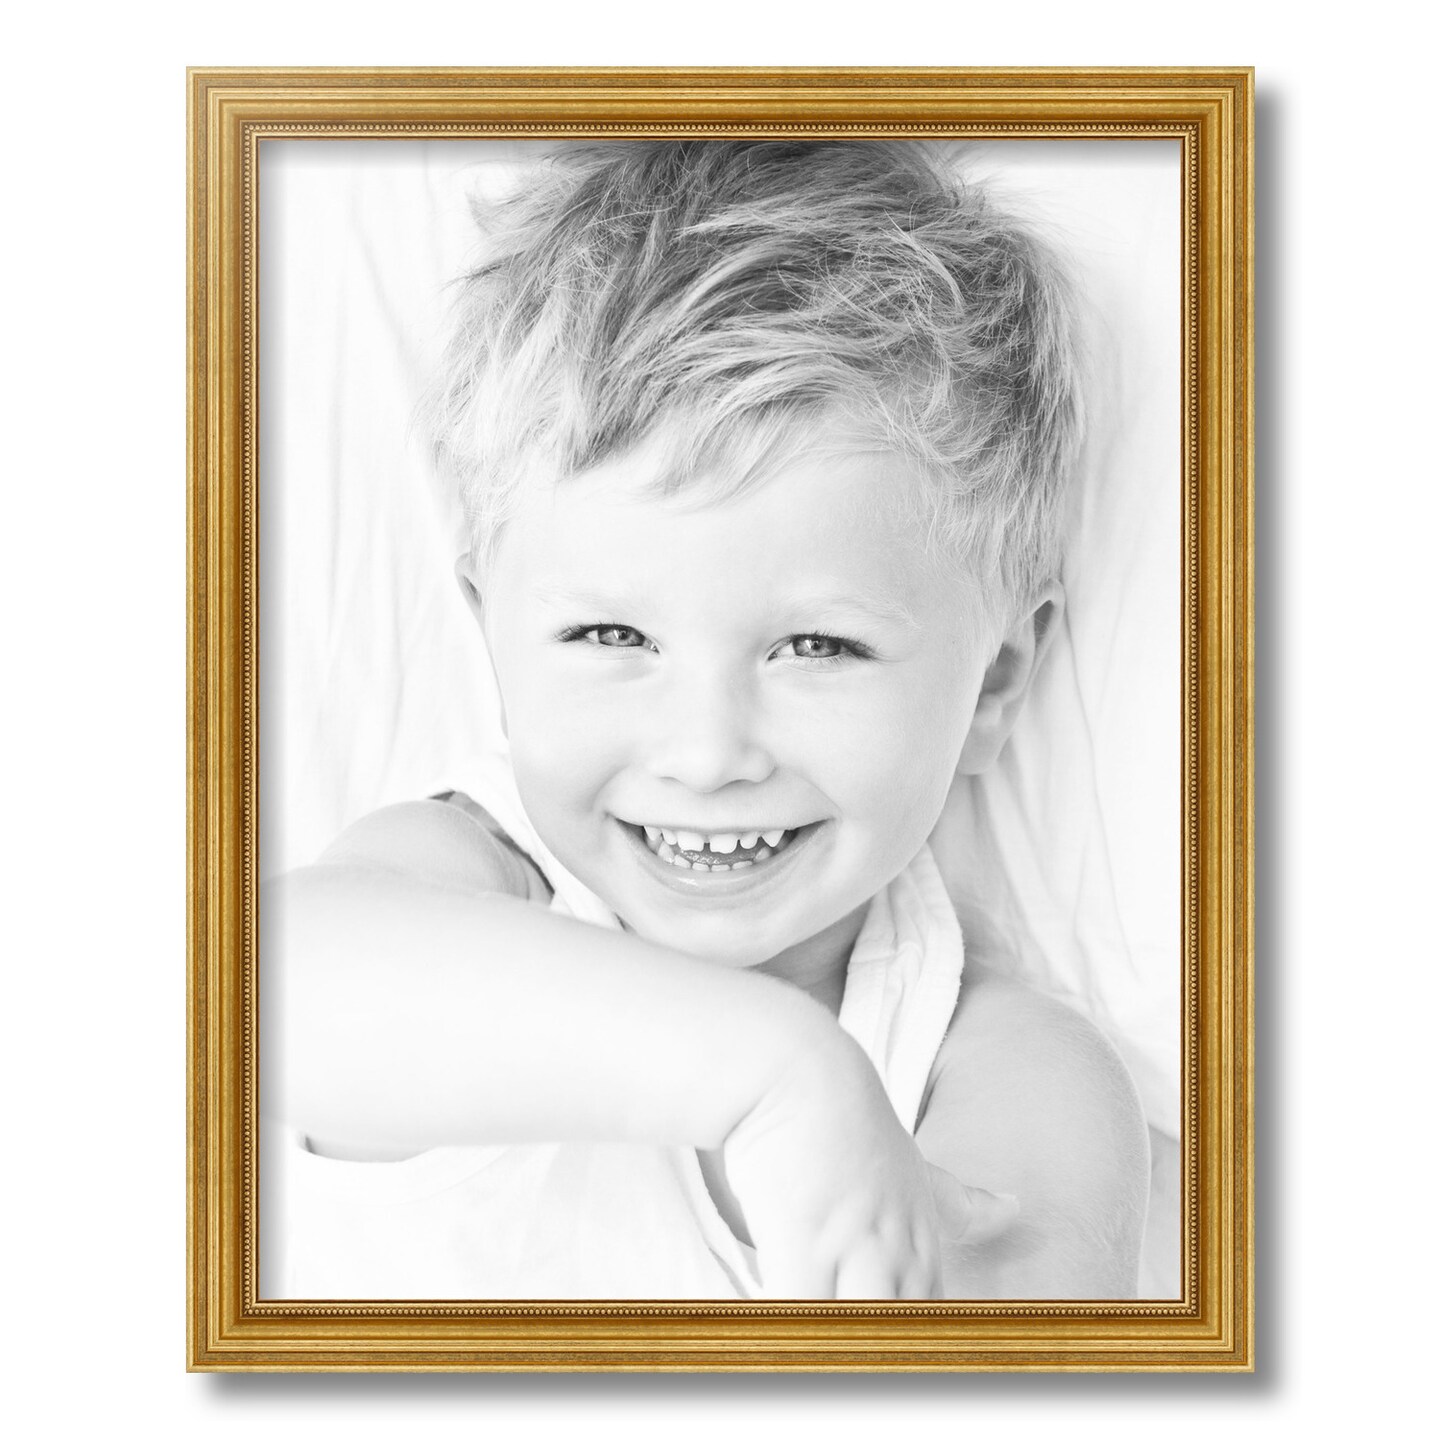 ArtToFrames 16x20 Inch Picture Frame, This 1.25 Inch Custom Wood Poster Frame is Available in Multiple Colors, Great for Your Art or Photos - Comes with Regular Acrylic and  Foam Backing 3/16 inch (V-81375-16x20)